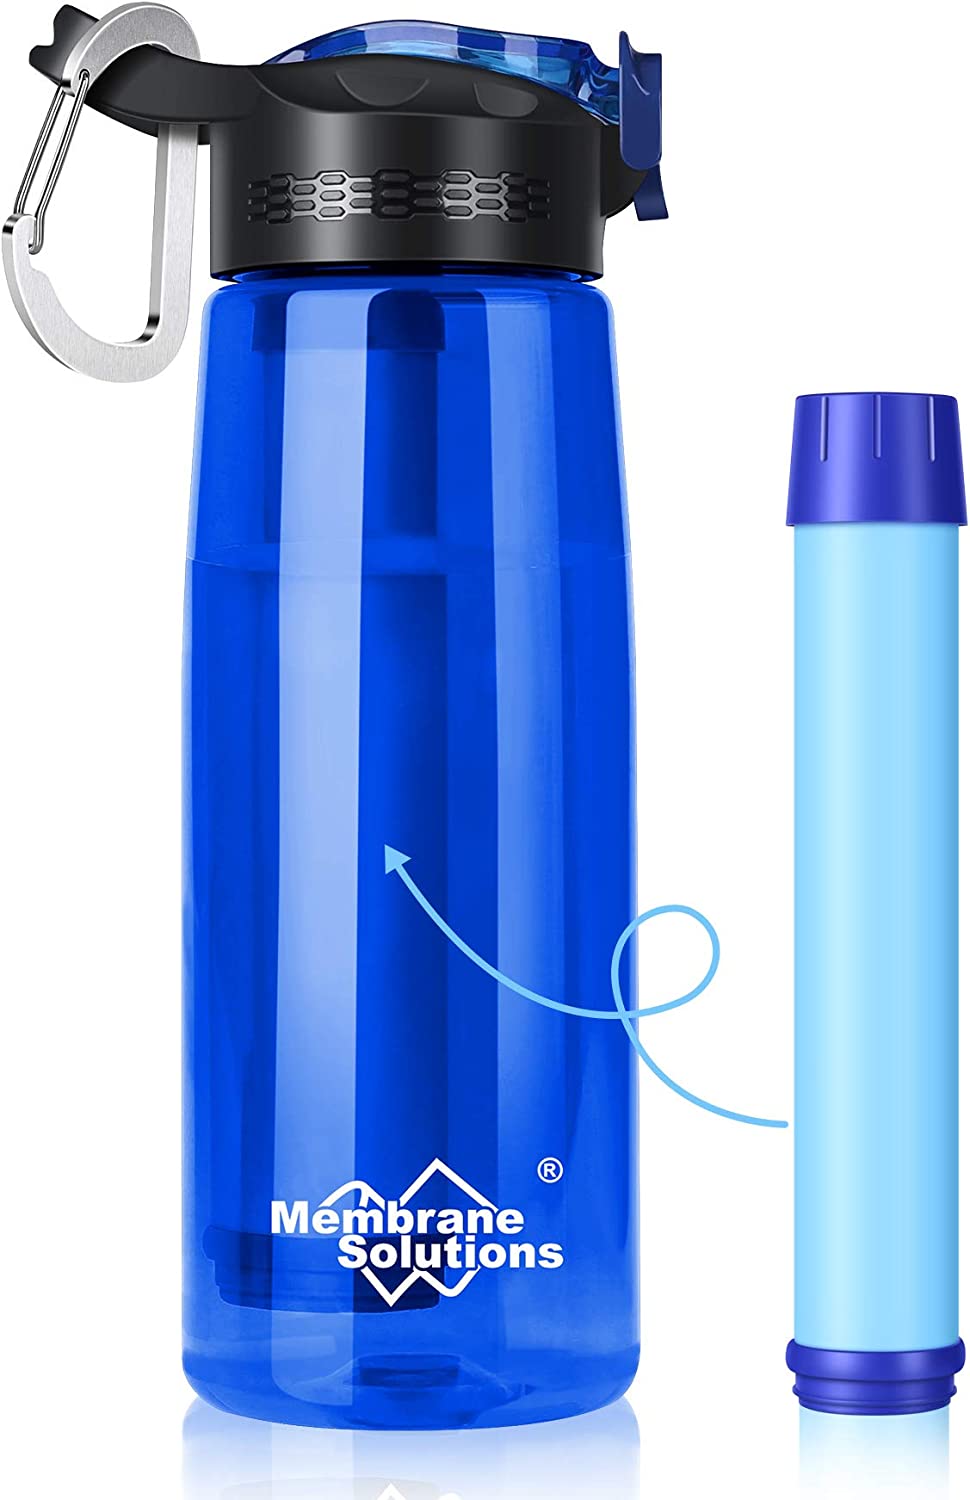 Membrane Solutions Filtered Water Bottle, 0.1-Micron 4-Stage Water Filter Bottle, Reusable BPA-Free Water Purifier Bottle for Camping, Hiking, Travel and Emergency